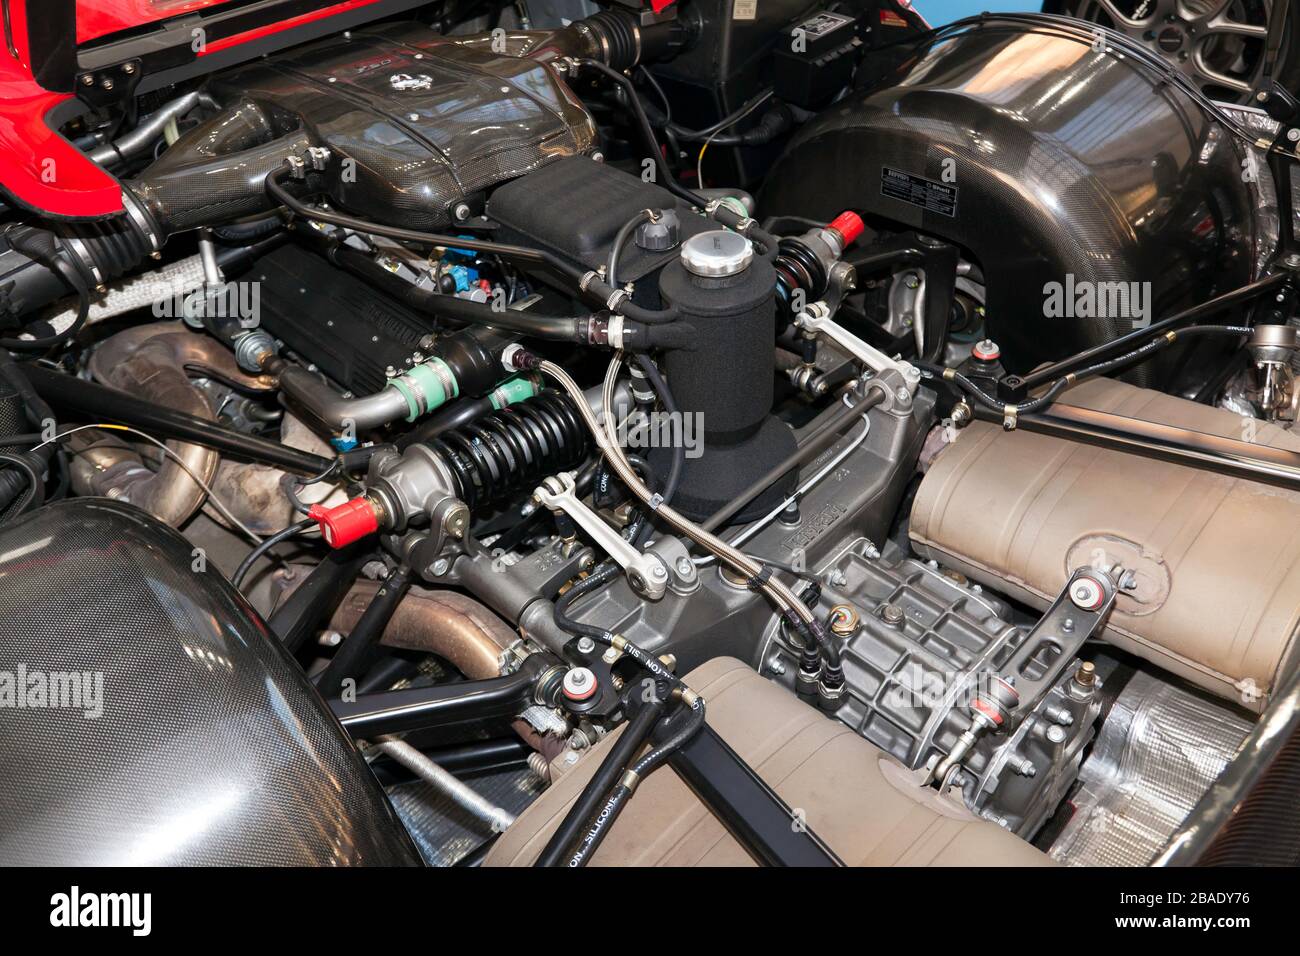 Close-up of the Engine bay of a Ferrari F50, on the Joe Macari  Stand, of the 2020 London Classic Car Show Stock Photo